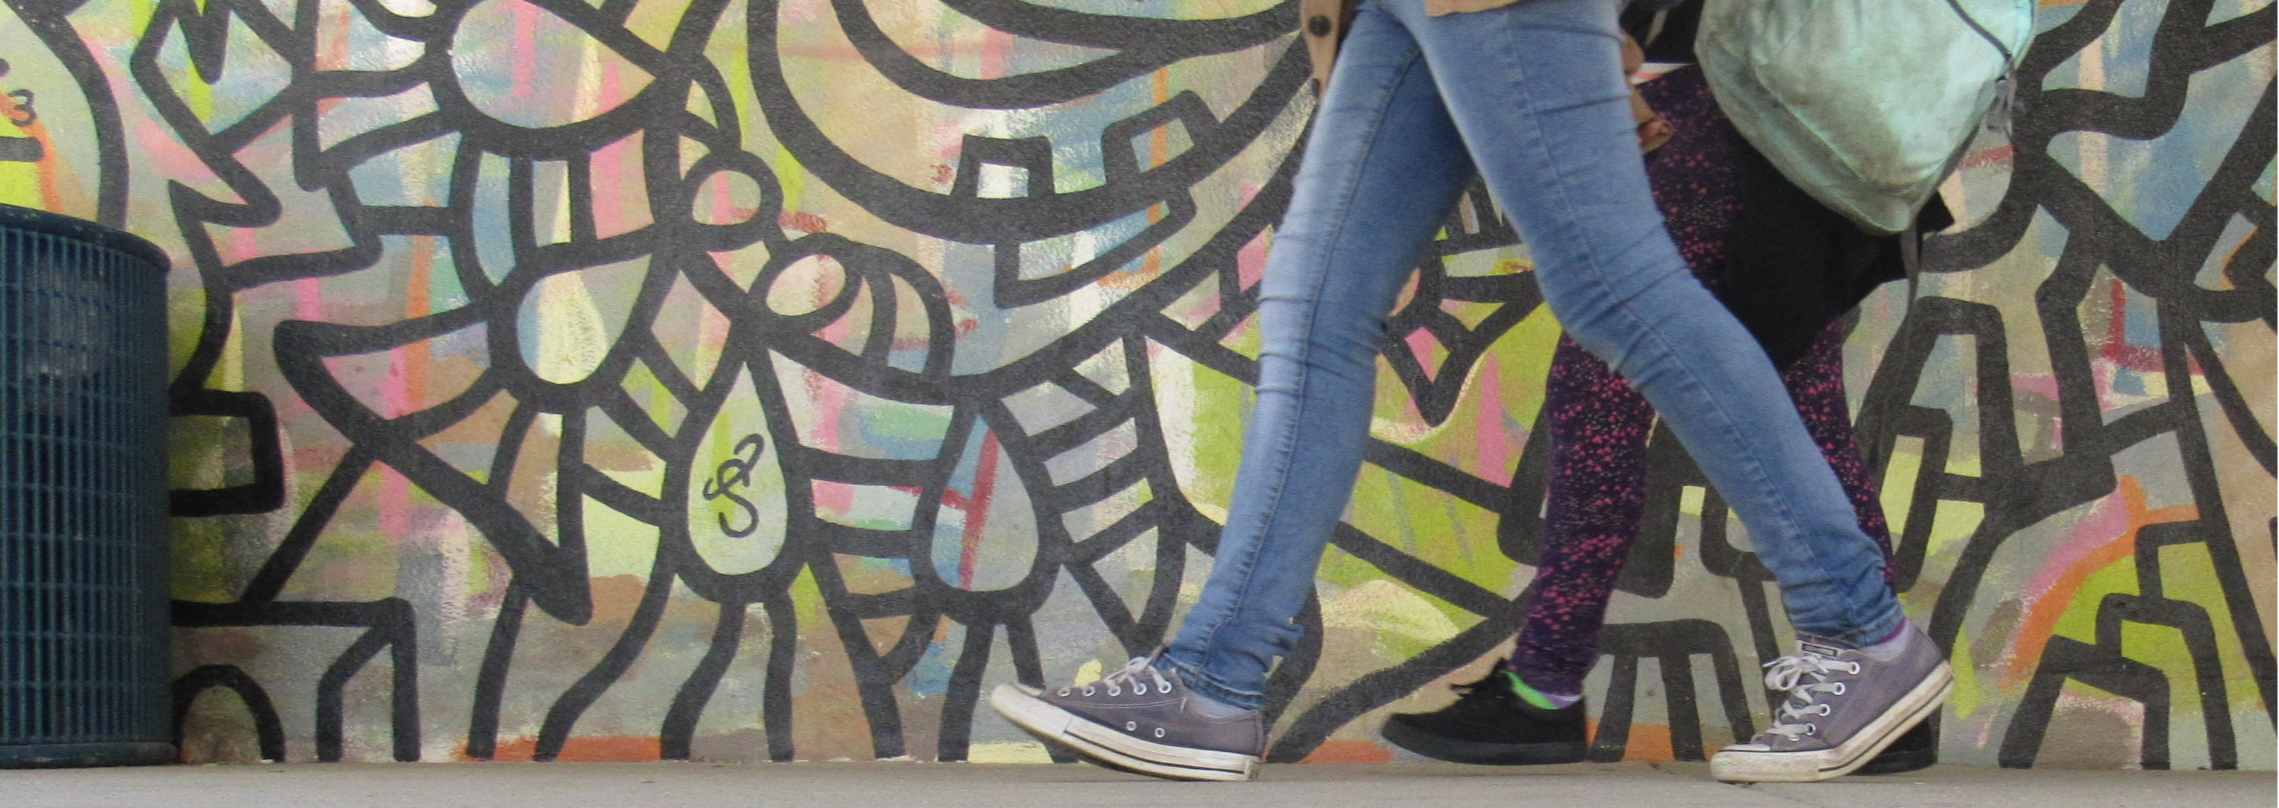 Two people walking in front of a mural